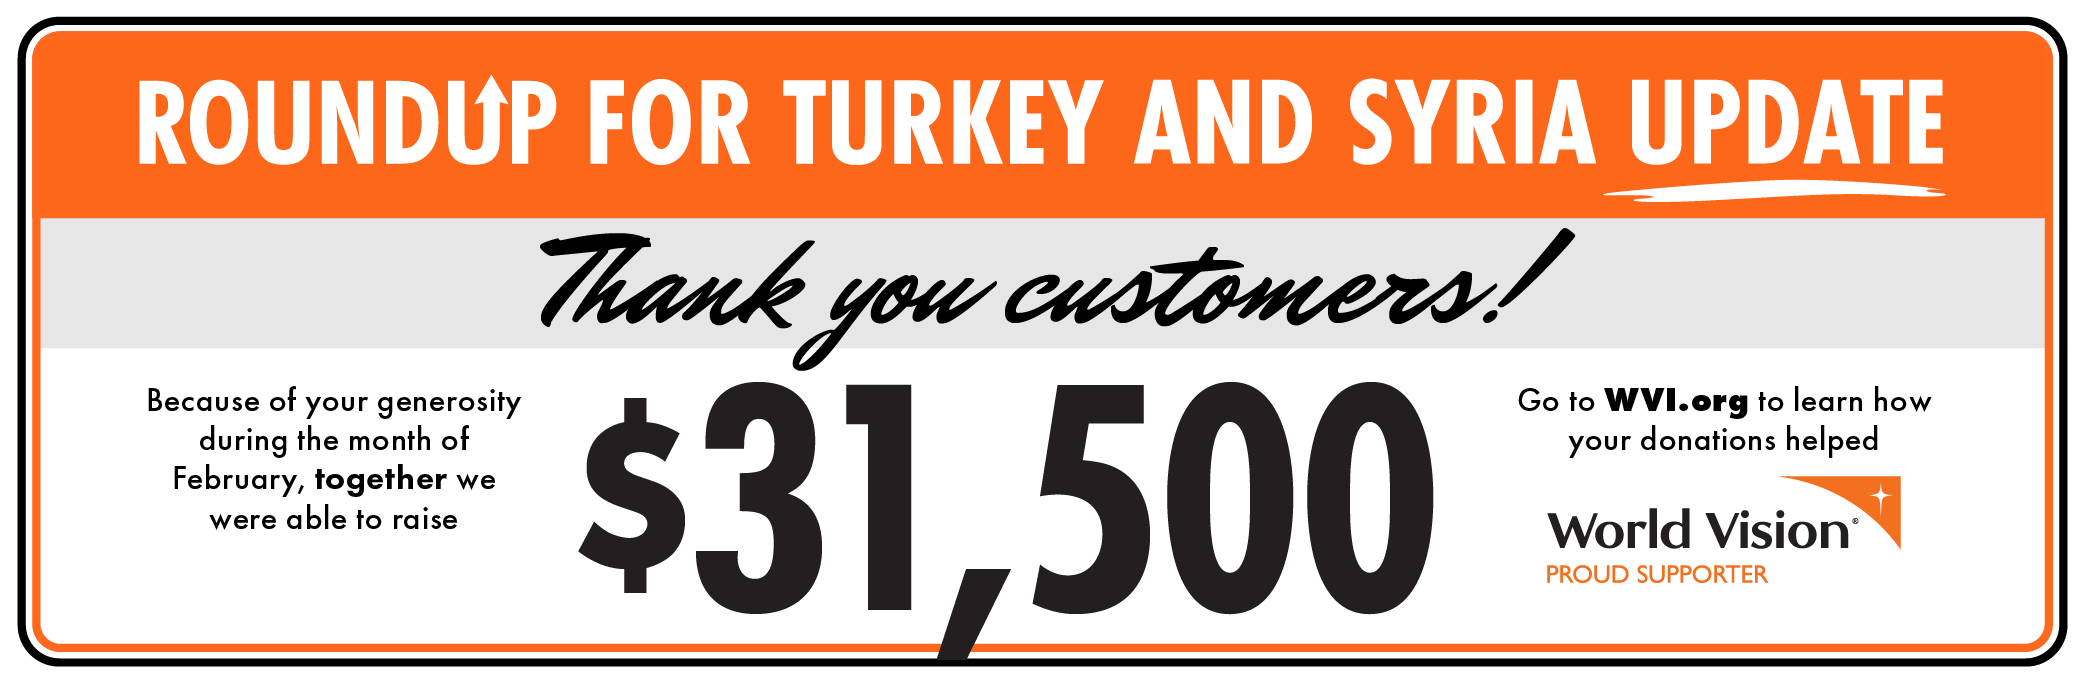 With our customers RoundUp donations in February and our matching donation, together we raised $31,500. Thank you!